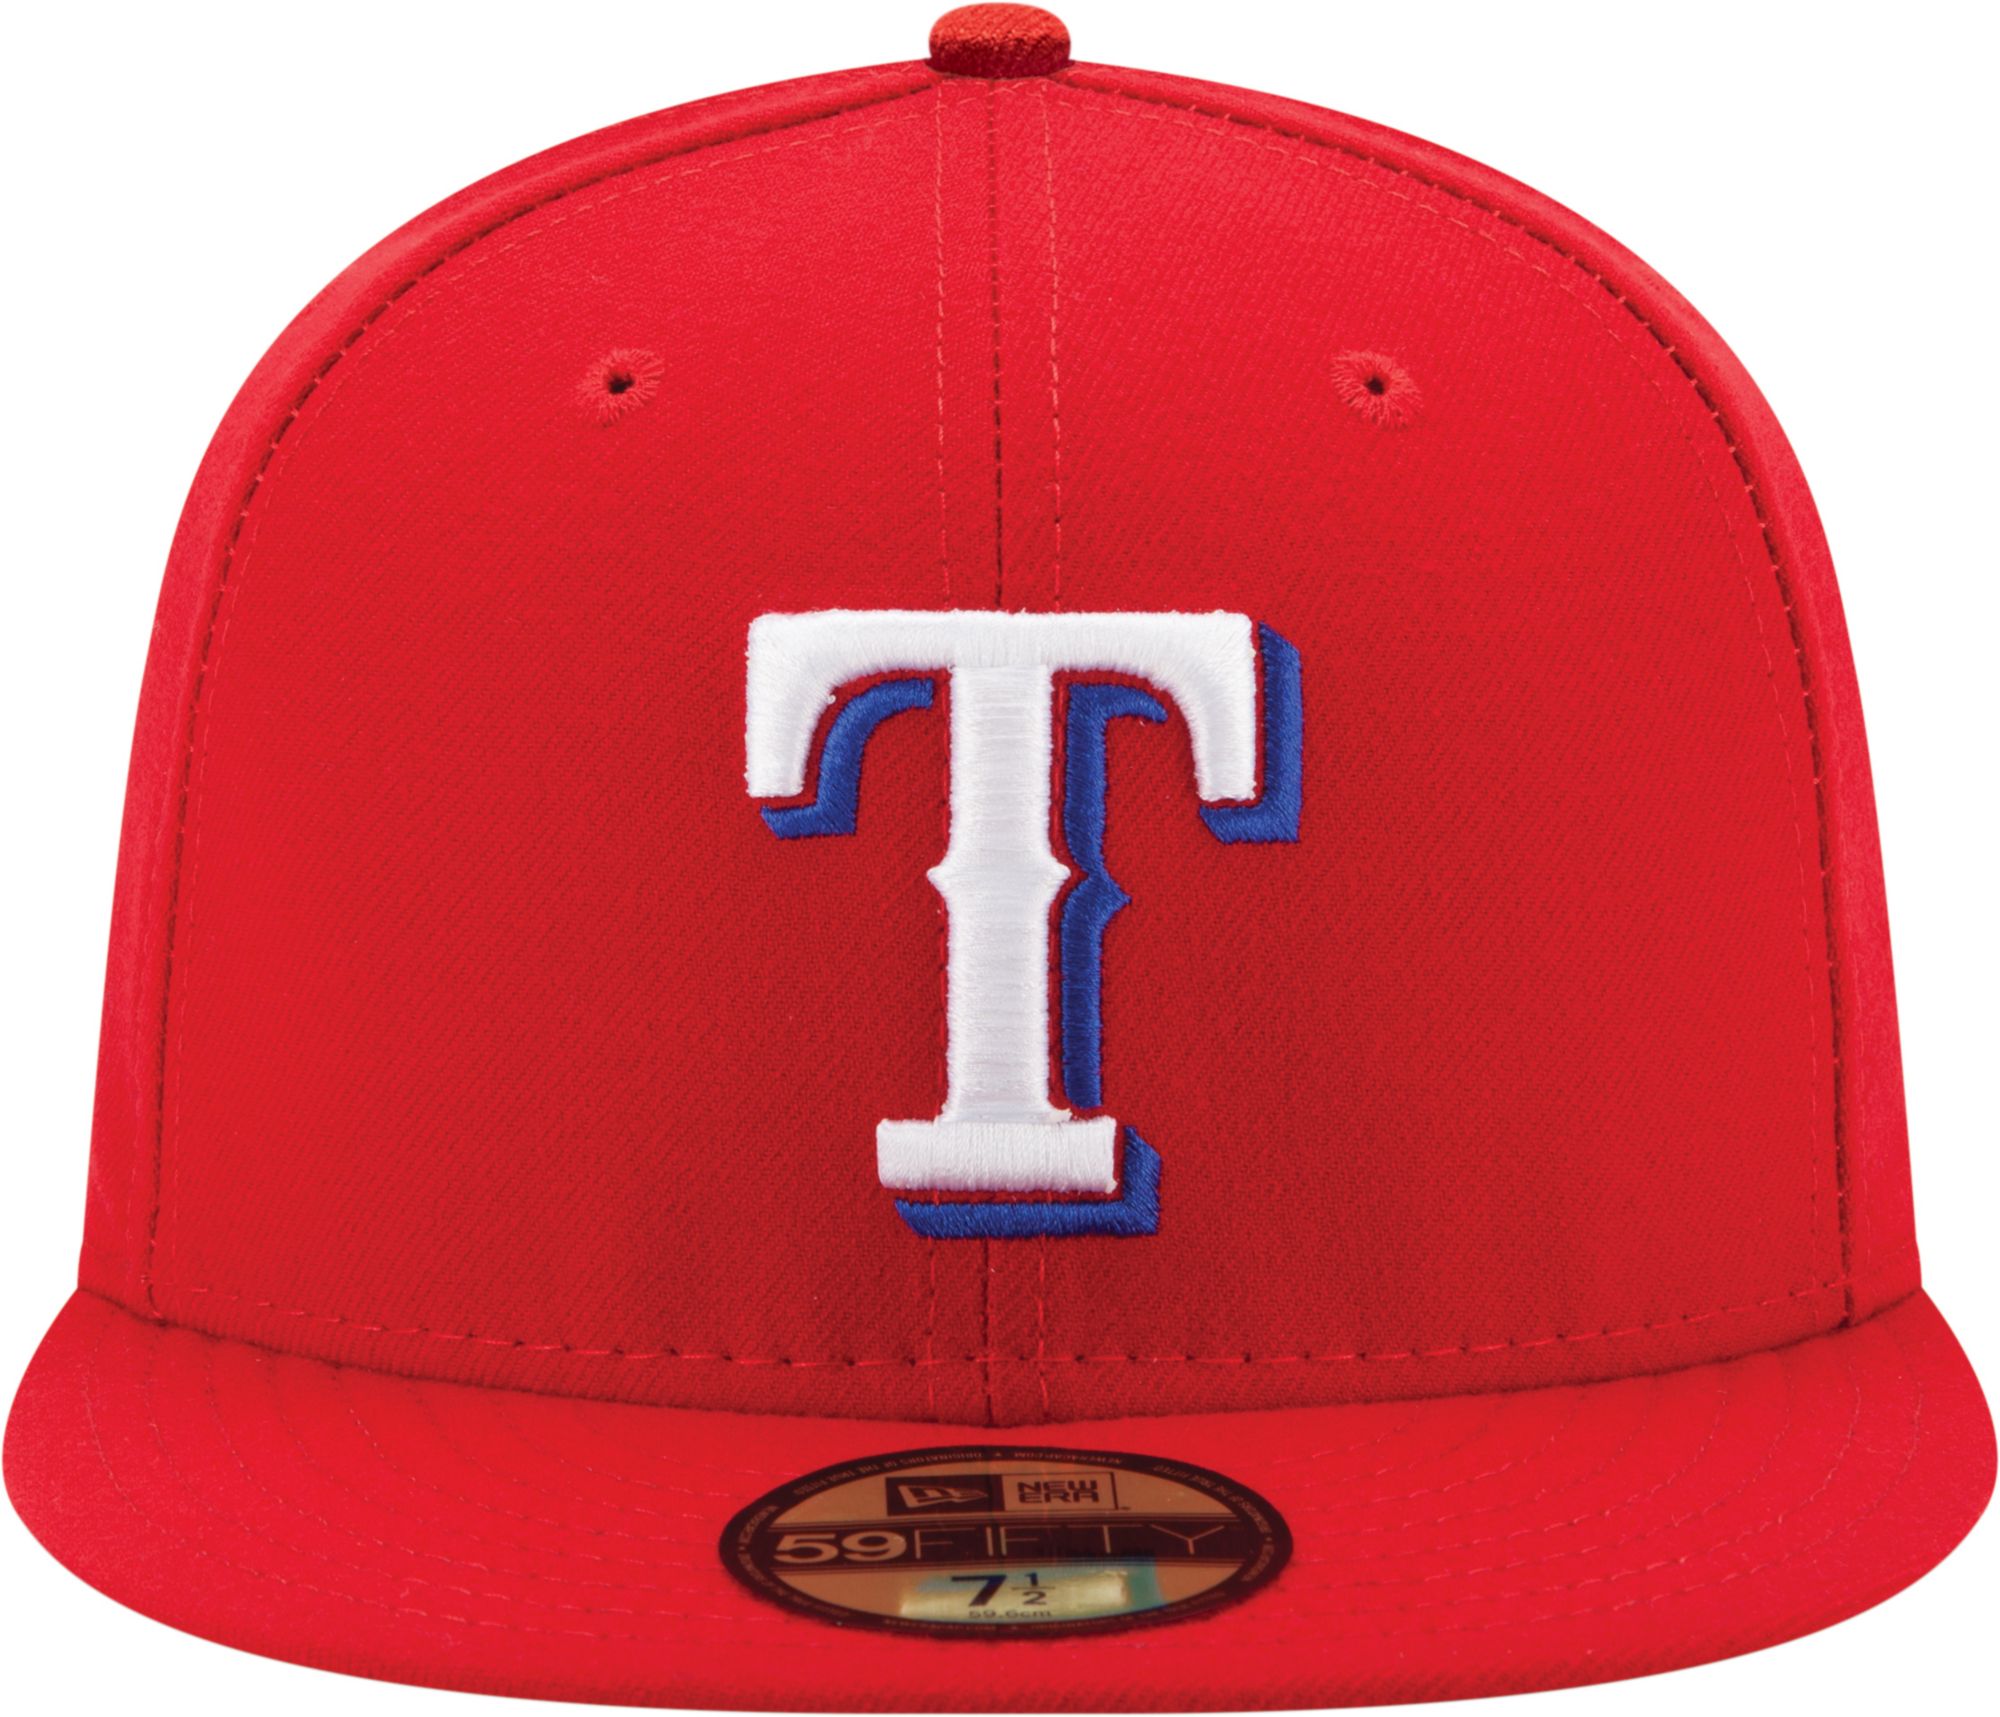 New Era Men's Texas Rangers 59Fifty Alternate Red Authentic Hat | Dick's  Sporting Goods